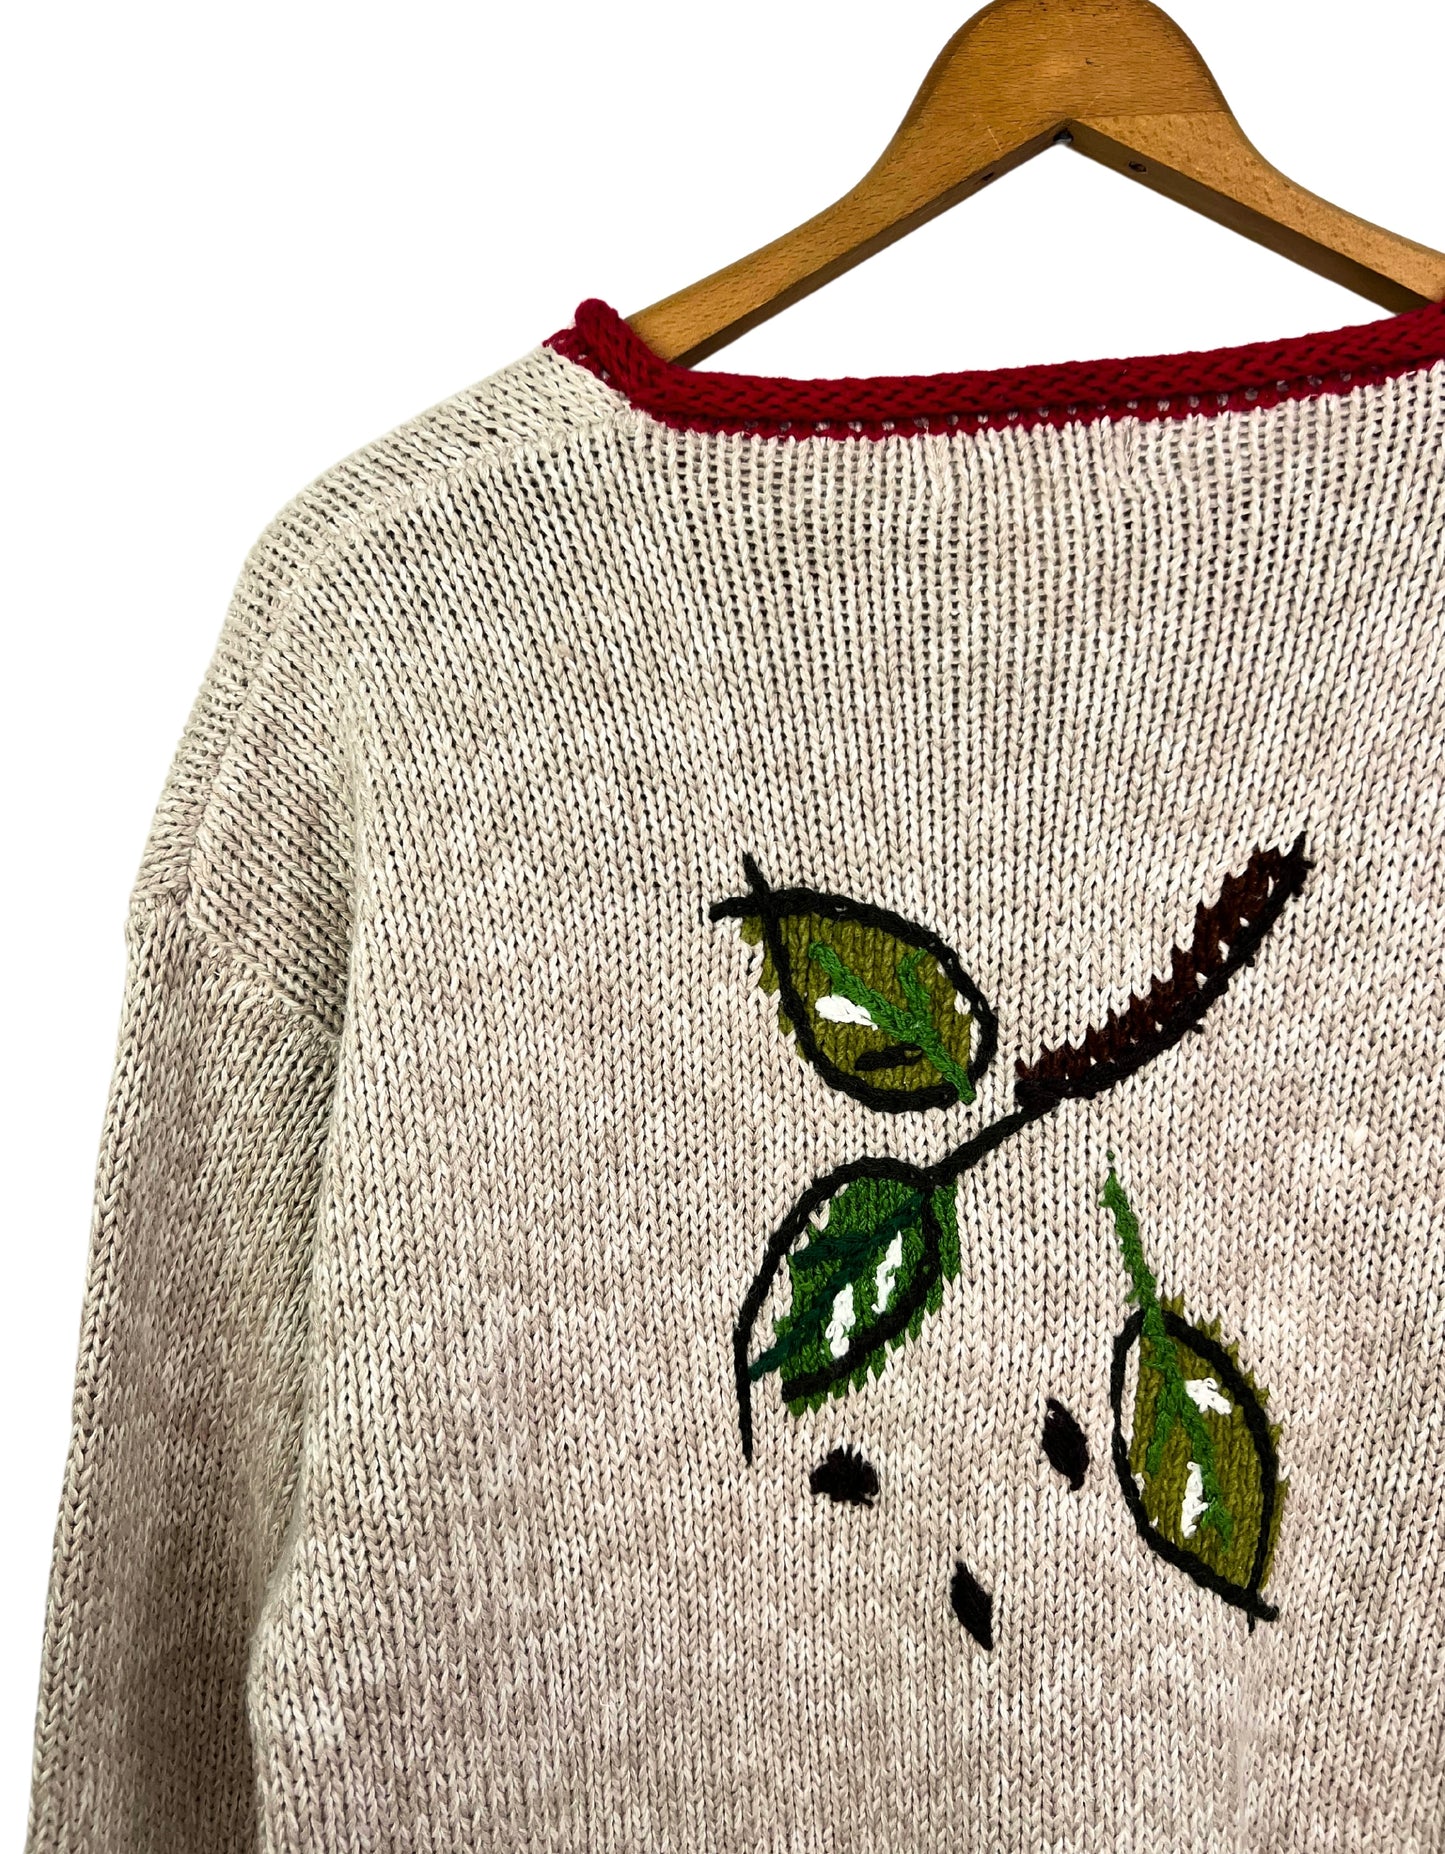 90’s Bite of Apple Hand-knit Sweater Size Small